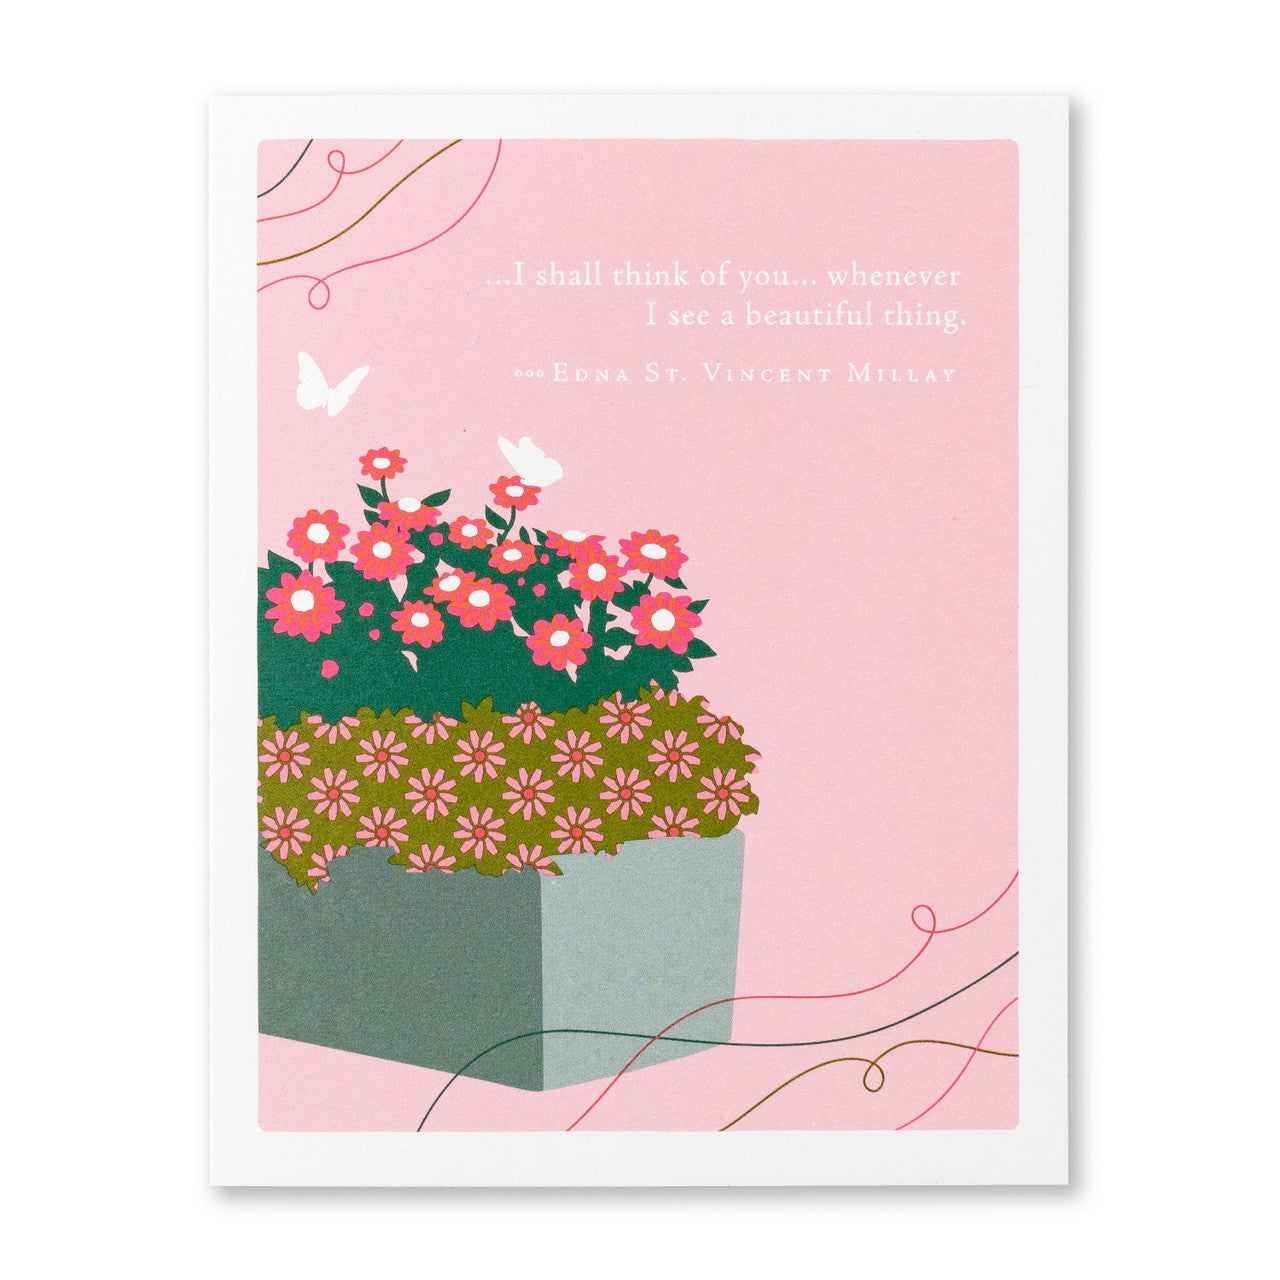 Mother's Day Card - “…I SHALL THINK OF YOU… WHENEVER I SEE A BEAUTIFUL THING.”